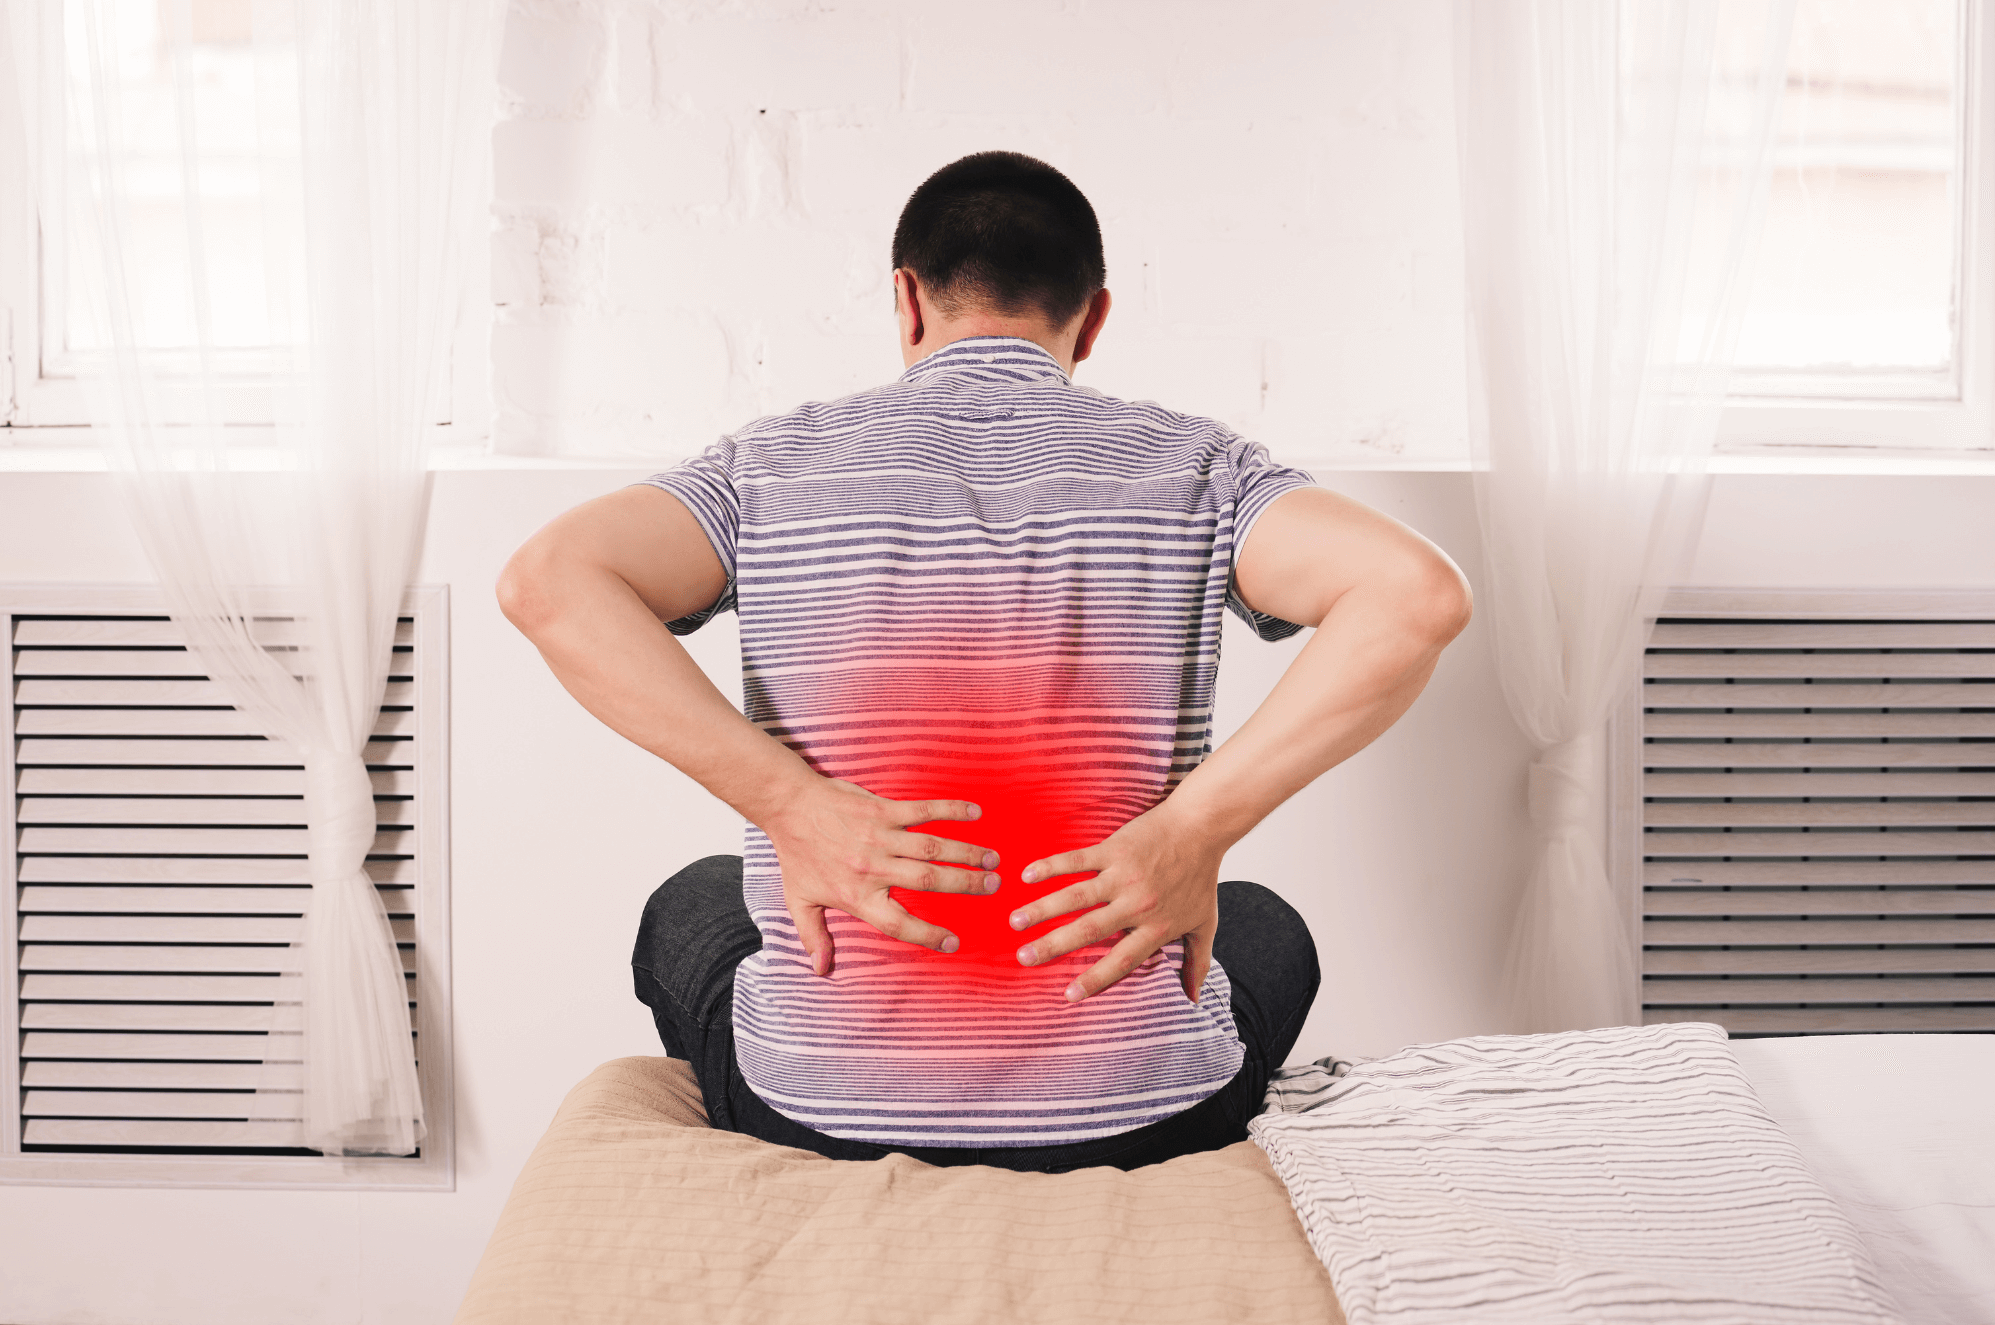 That Hip Pain Could Actually Be a Sciatica Problem: Healthy Life